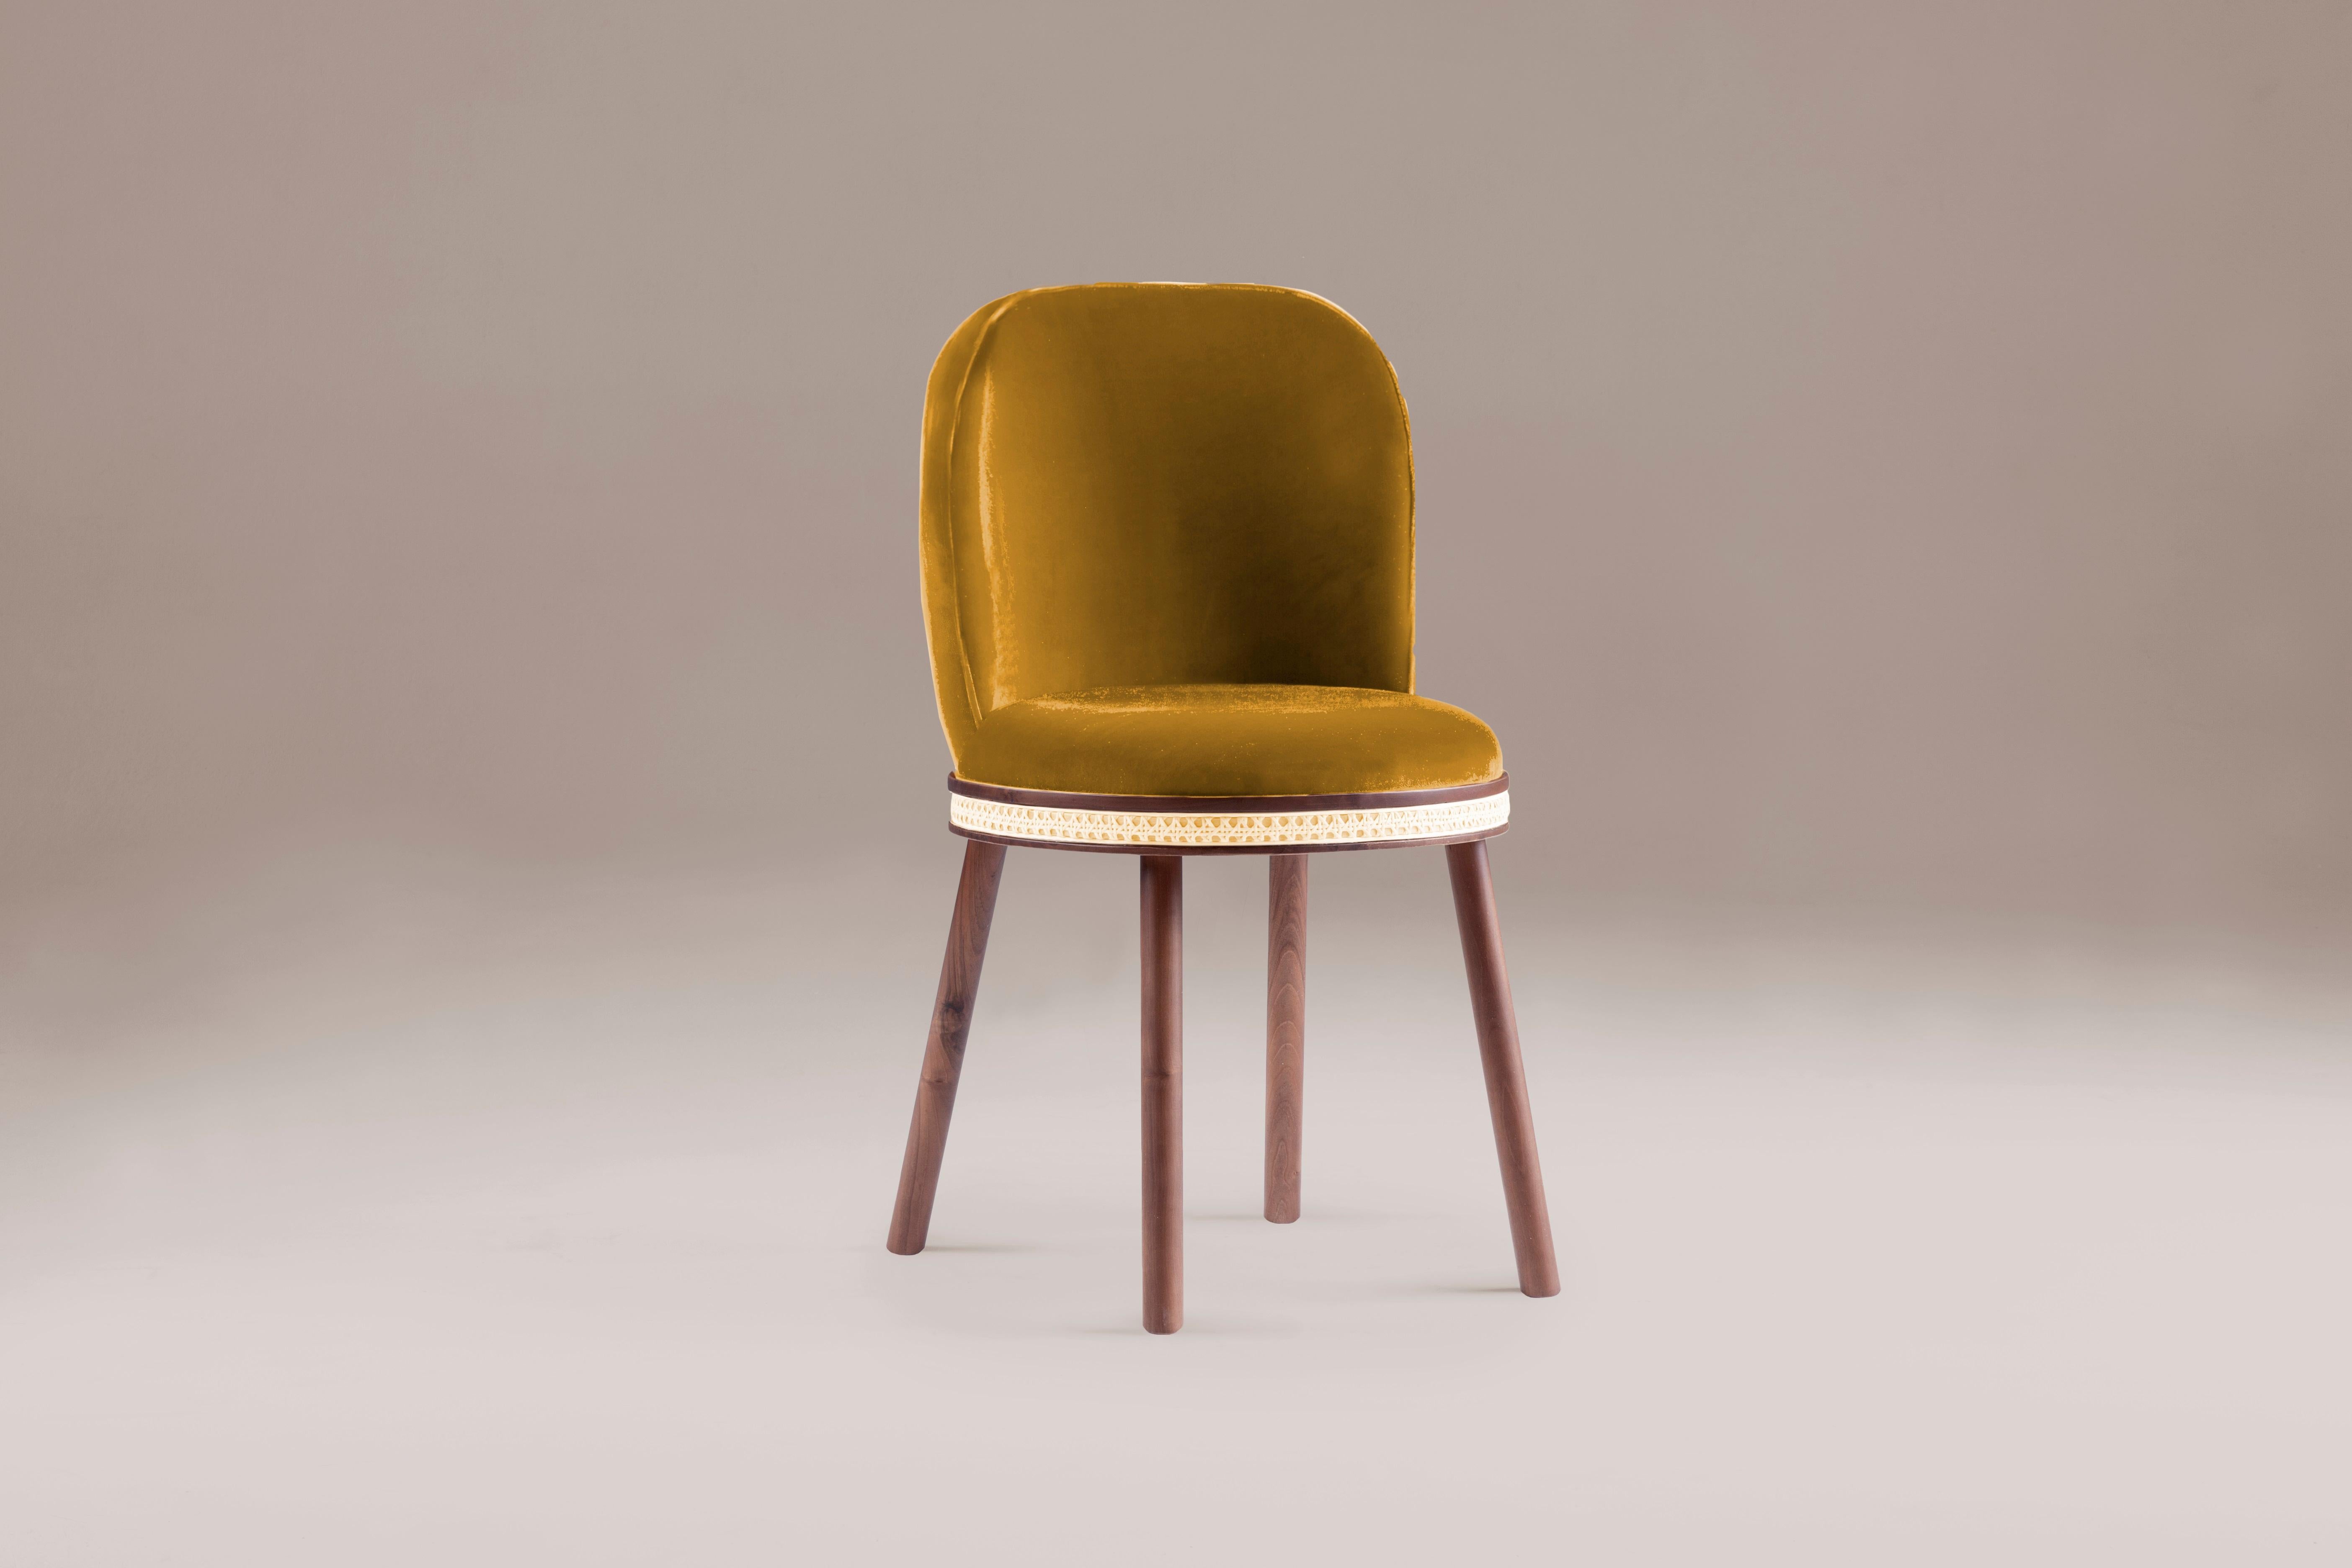 DOOQ Mid-Century Modern Dinning Chair Alma in Yellow Velvet and Walnut Wood Legs

Alma chair is costumizable in the fabric options and wood legs.

In a piece that combines classic and modern aesthetics we can find a certain harmonic gracefulness